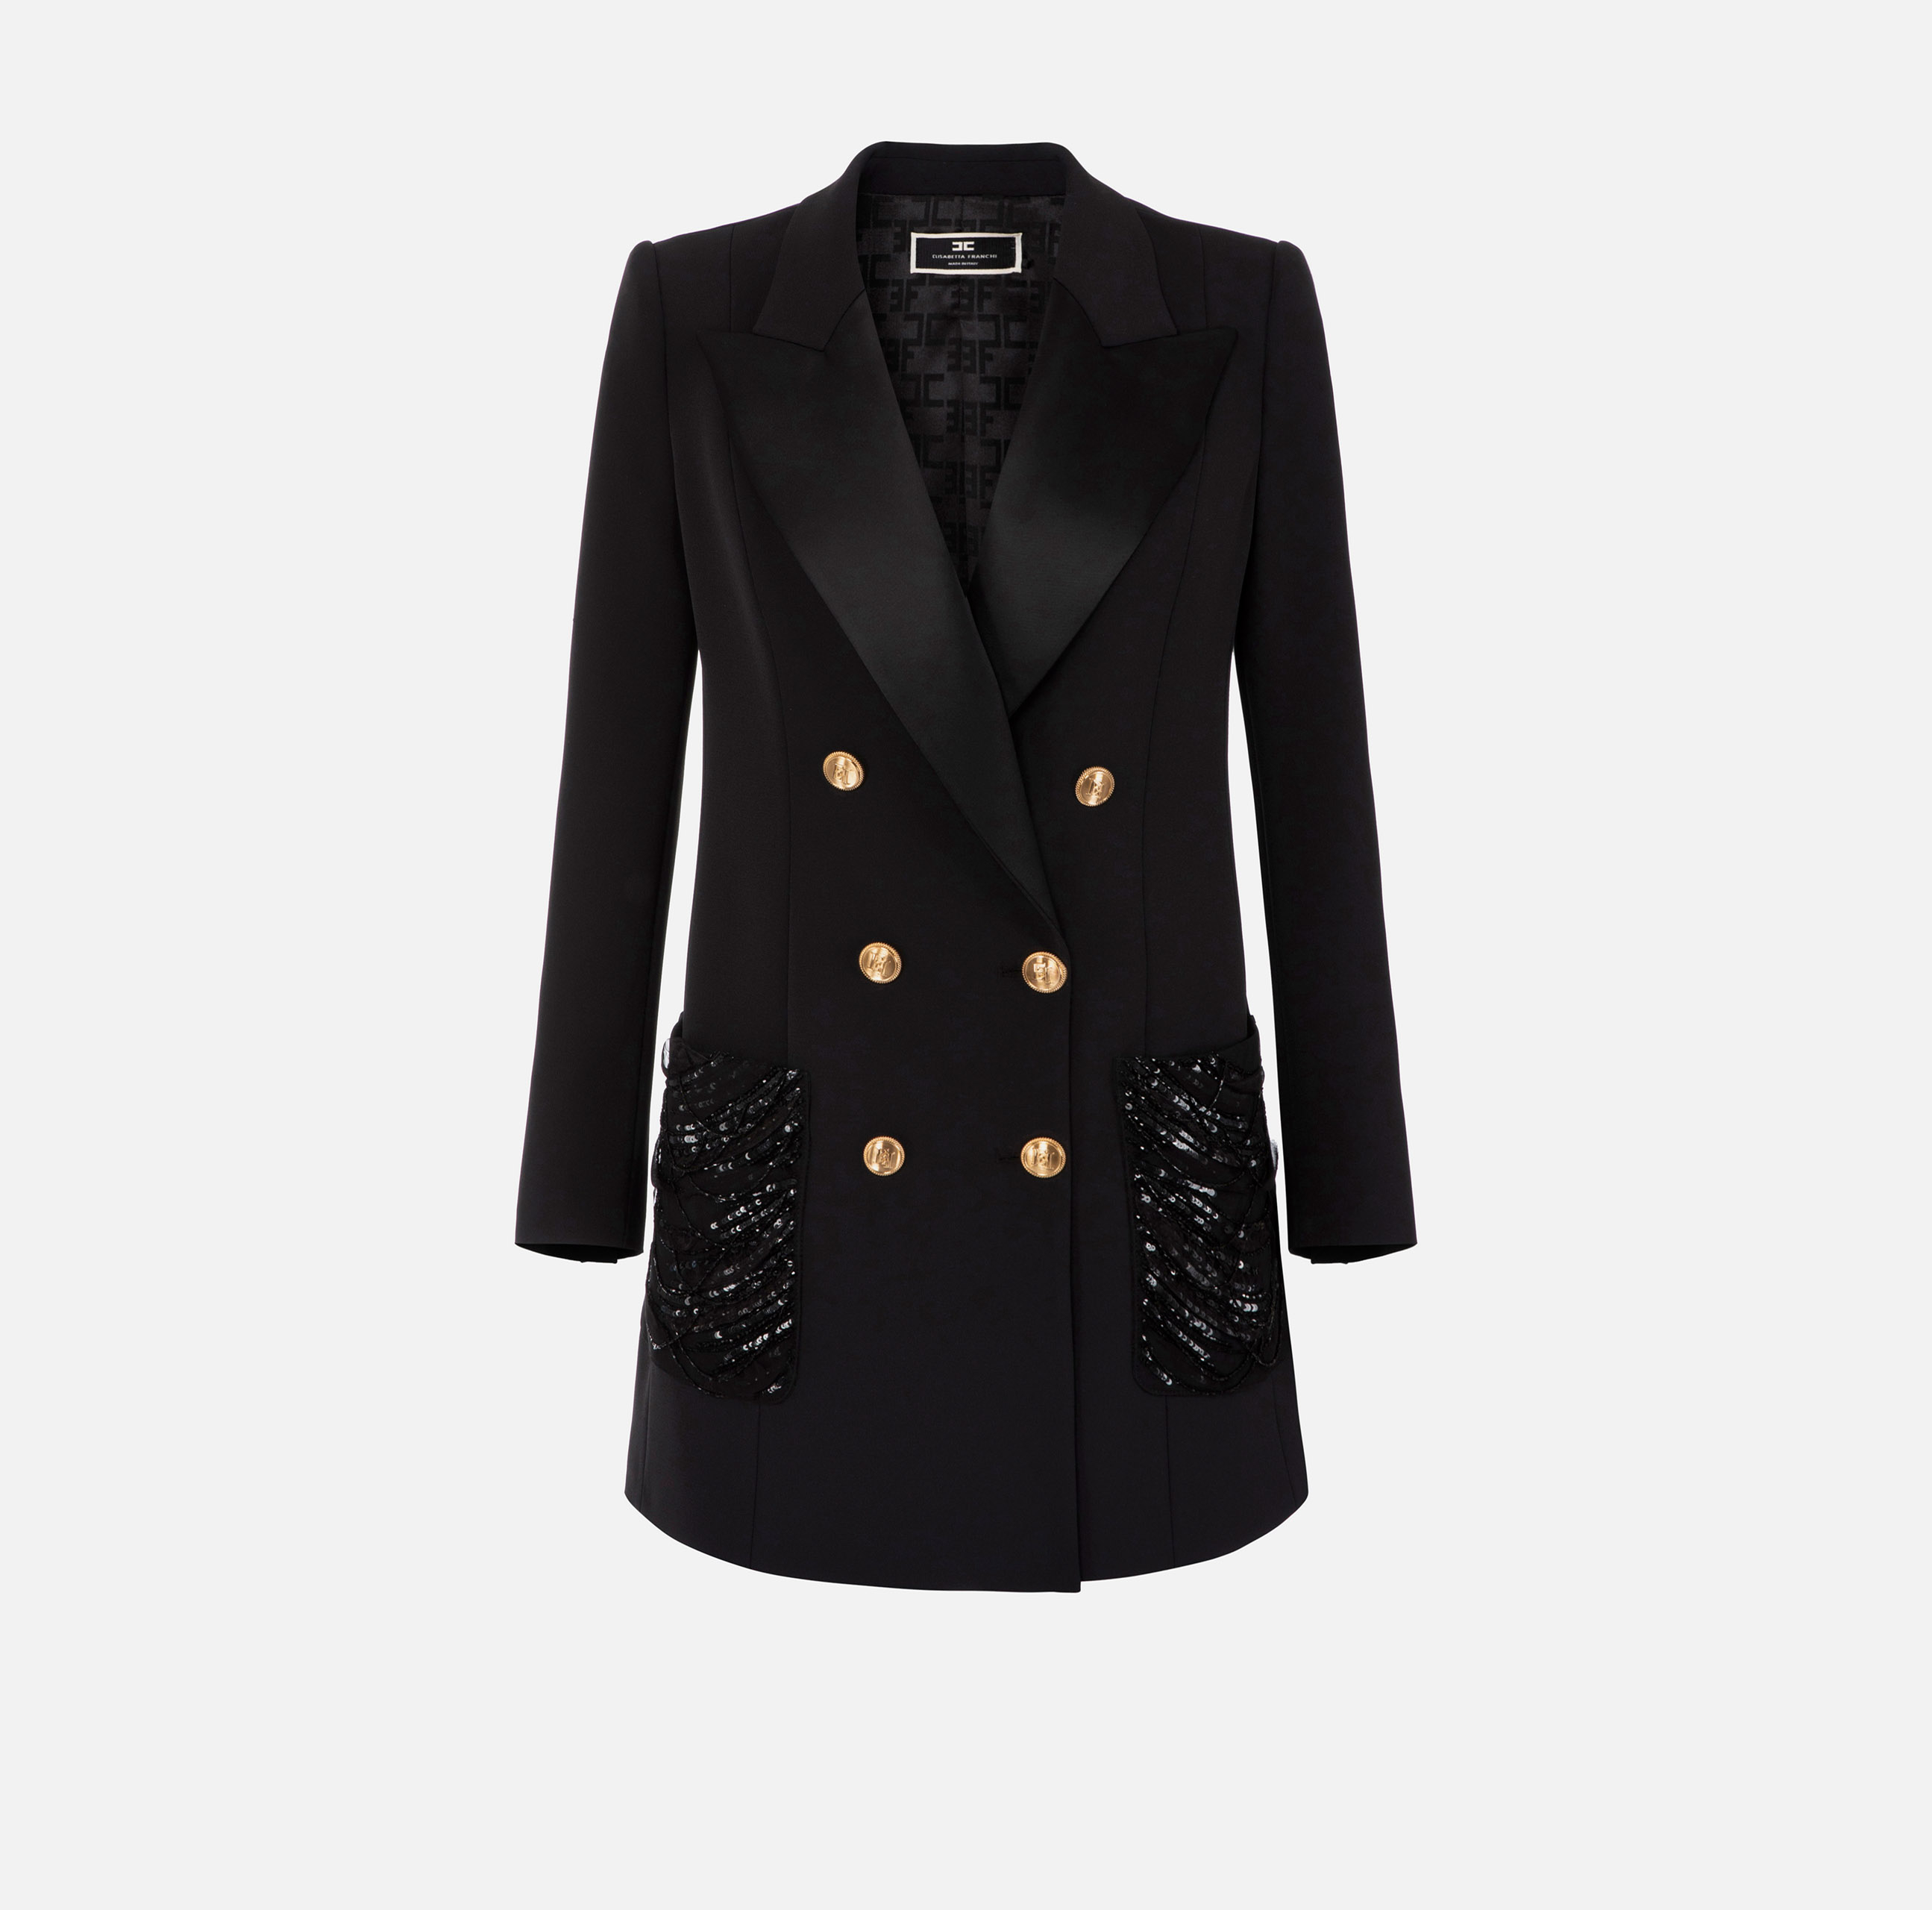 Coat dress in double layer crêpe fabric with embroidered pockets - Elisabetta Franchi